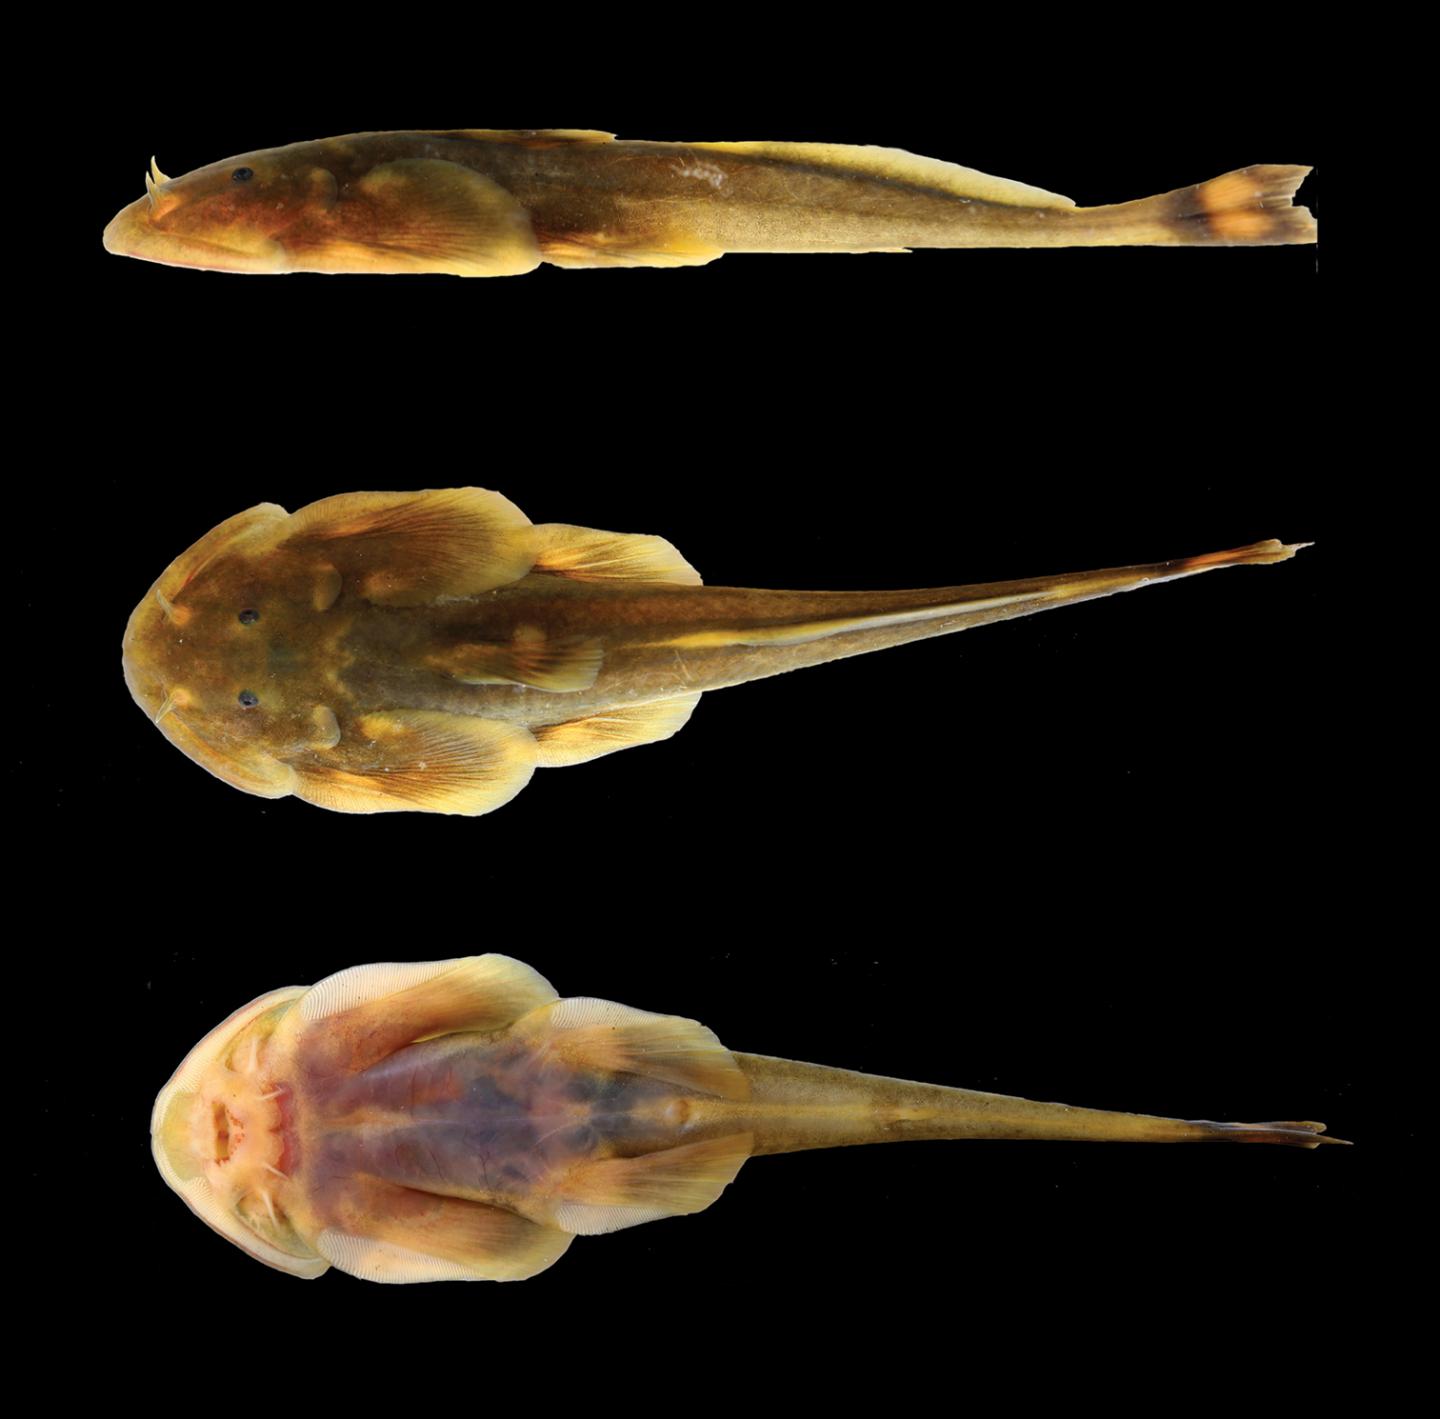 THIS IS THE NEW CATFISH SPECIES OREOGLANIS HPONKANENSIS DISCOVERED IN MYANMAR